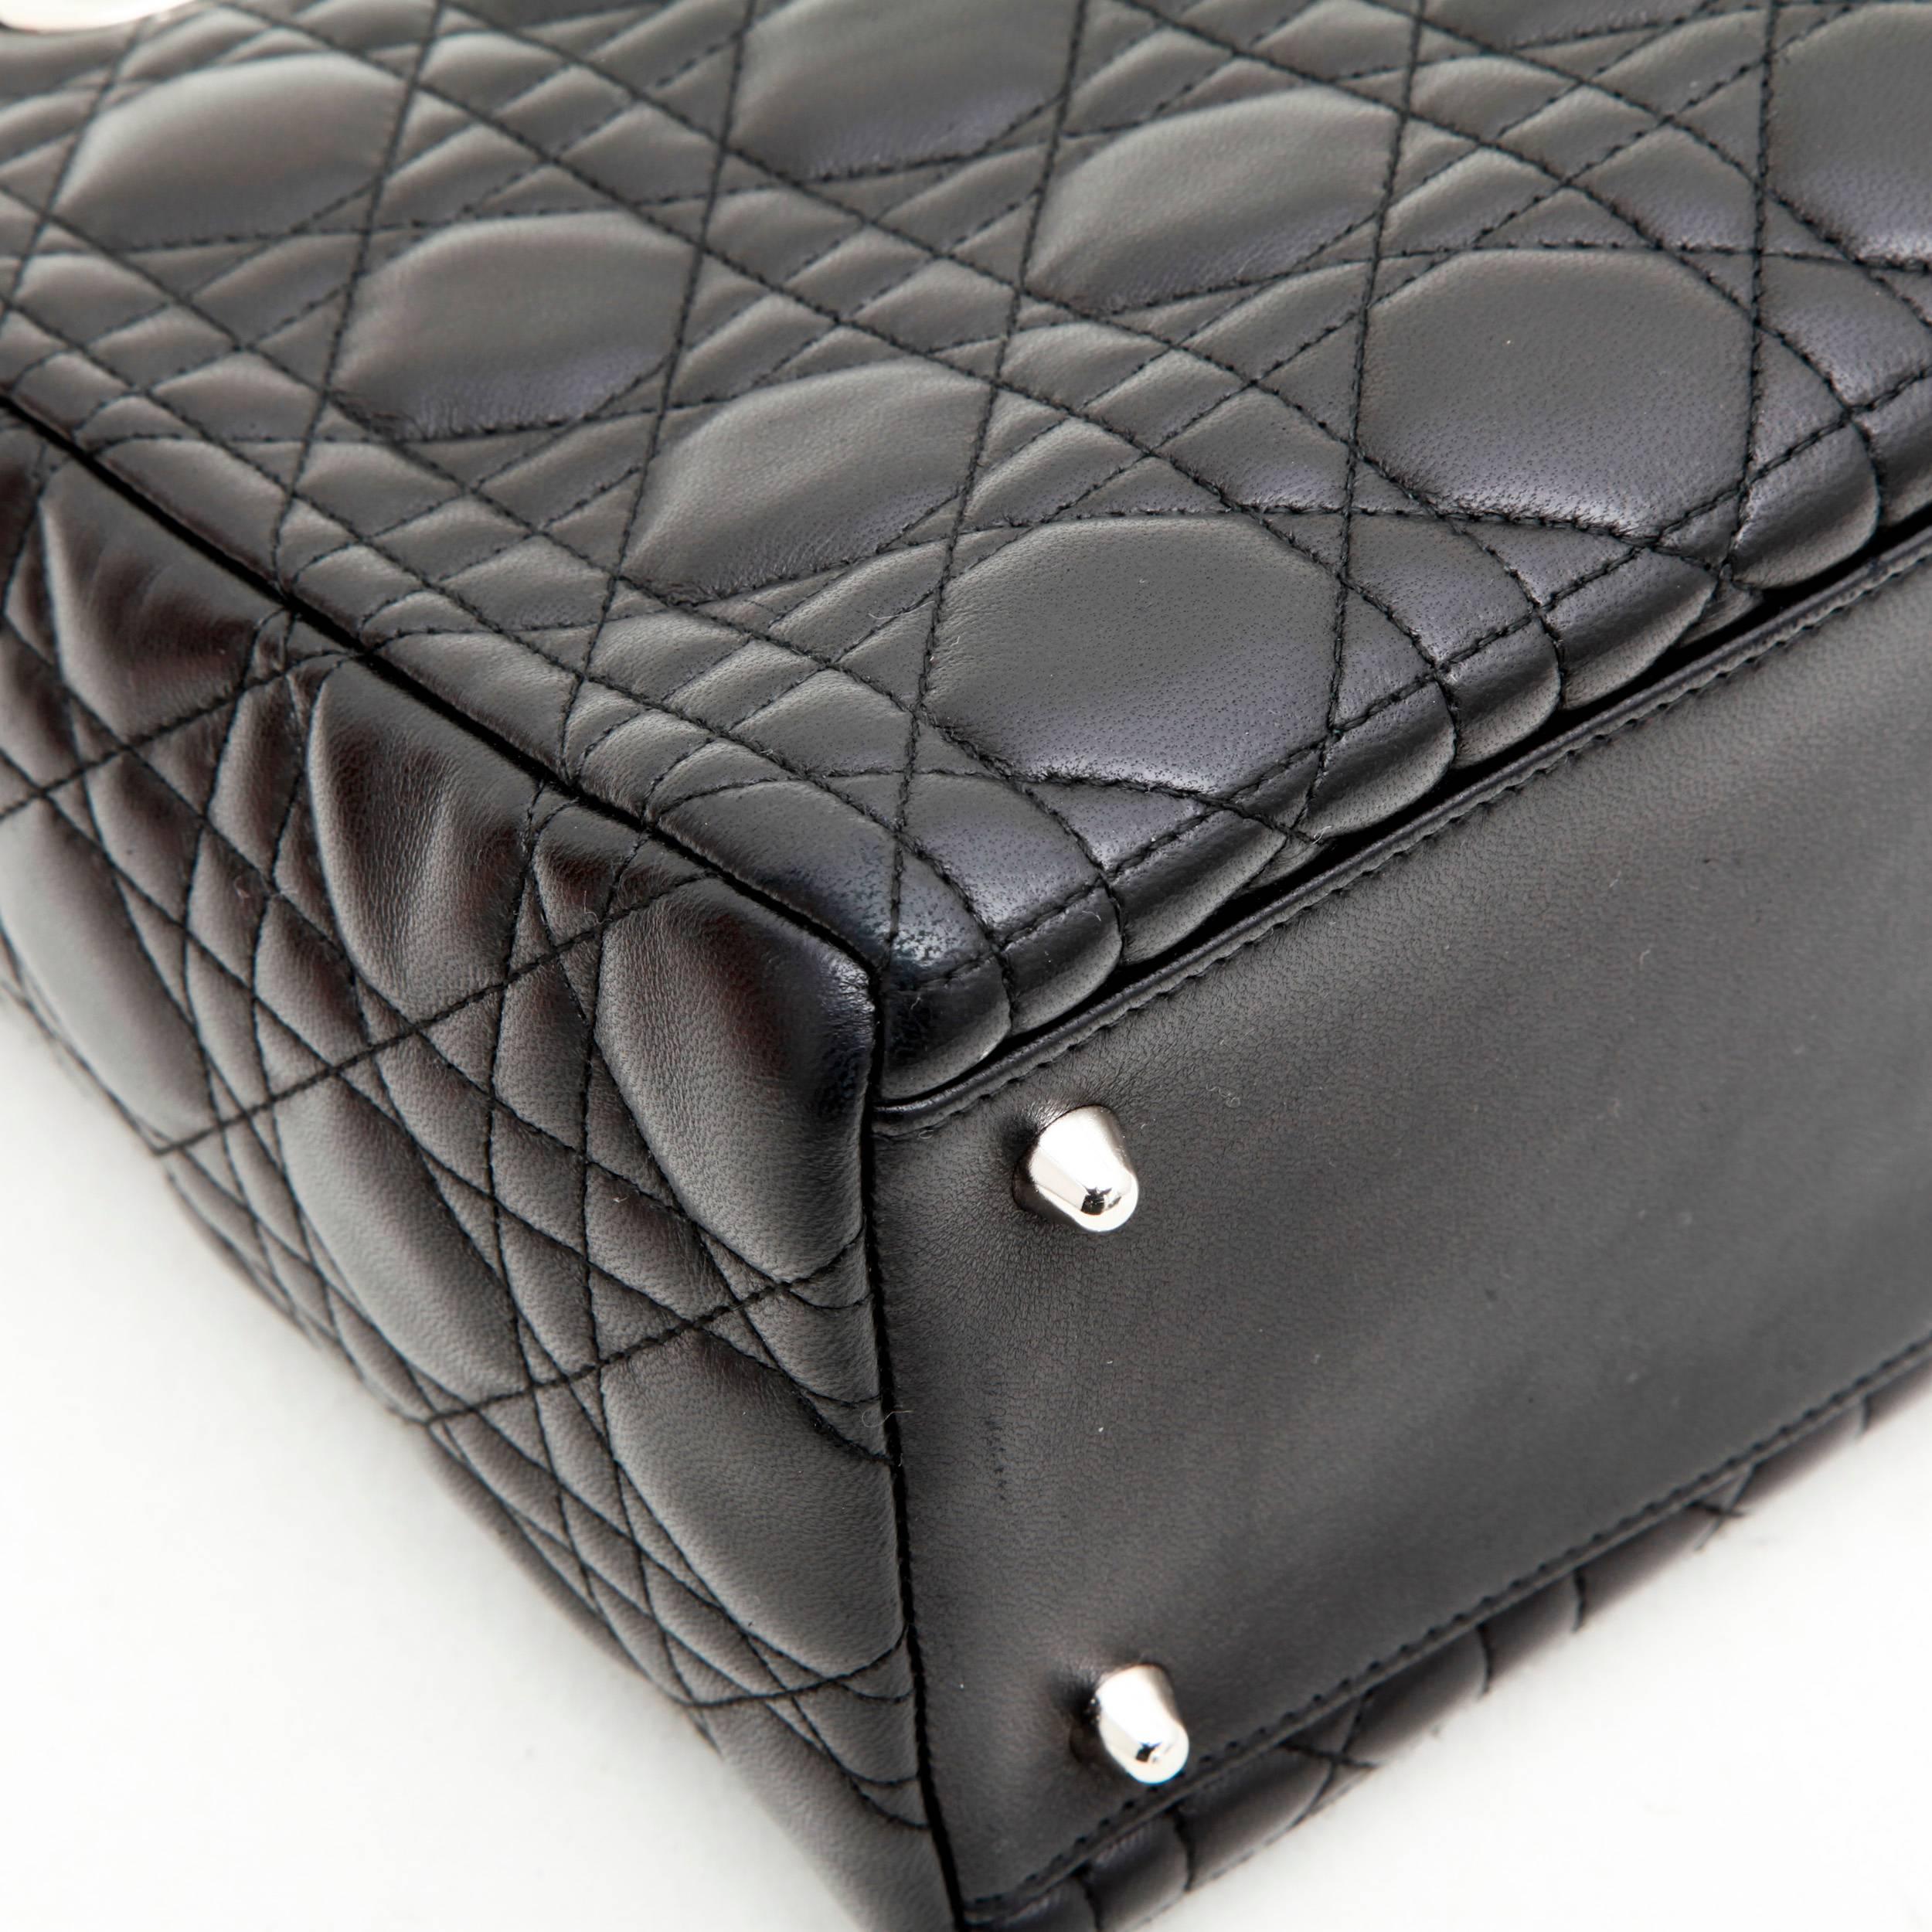 CHRISTIAN DIOR 'Lady Dior' Bag in Black Quilted Leather 2